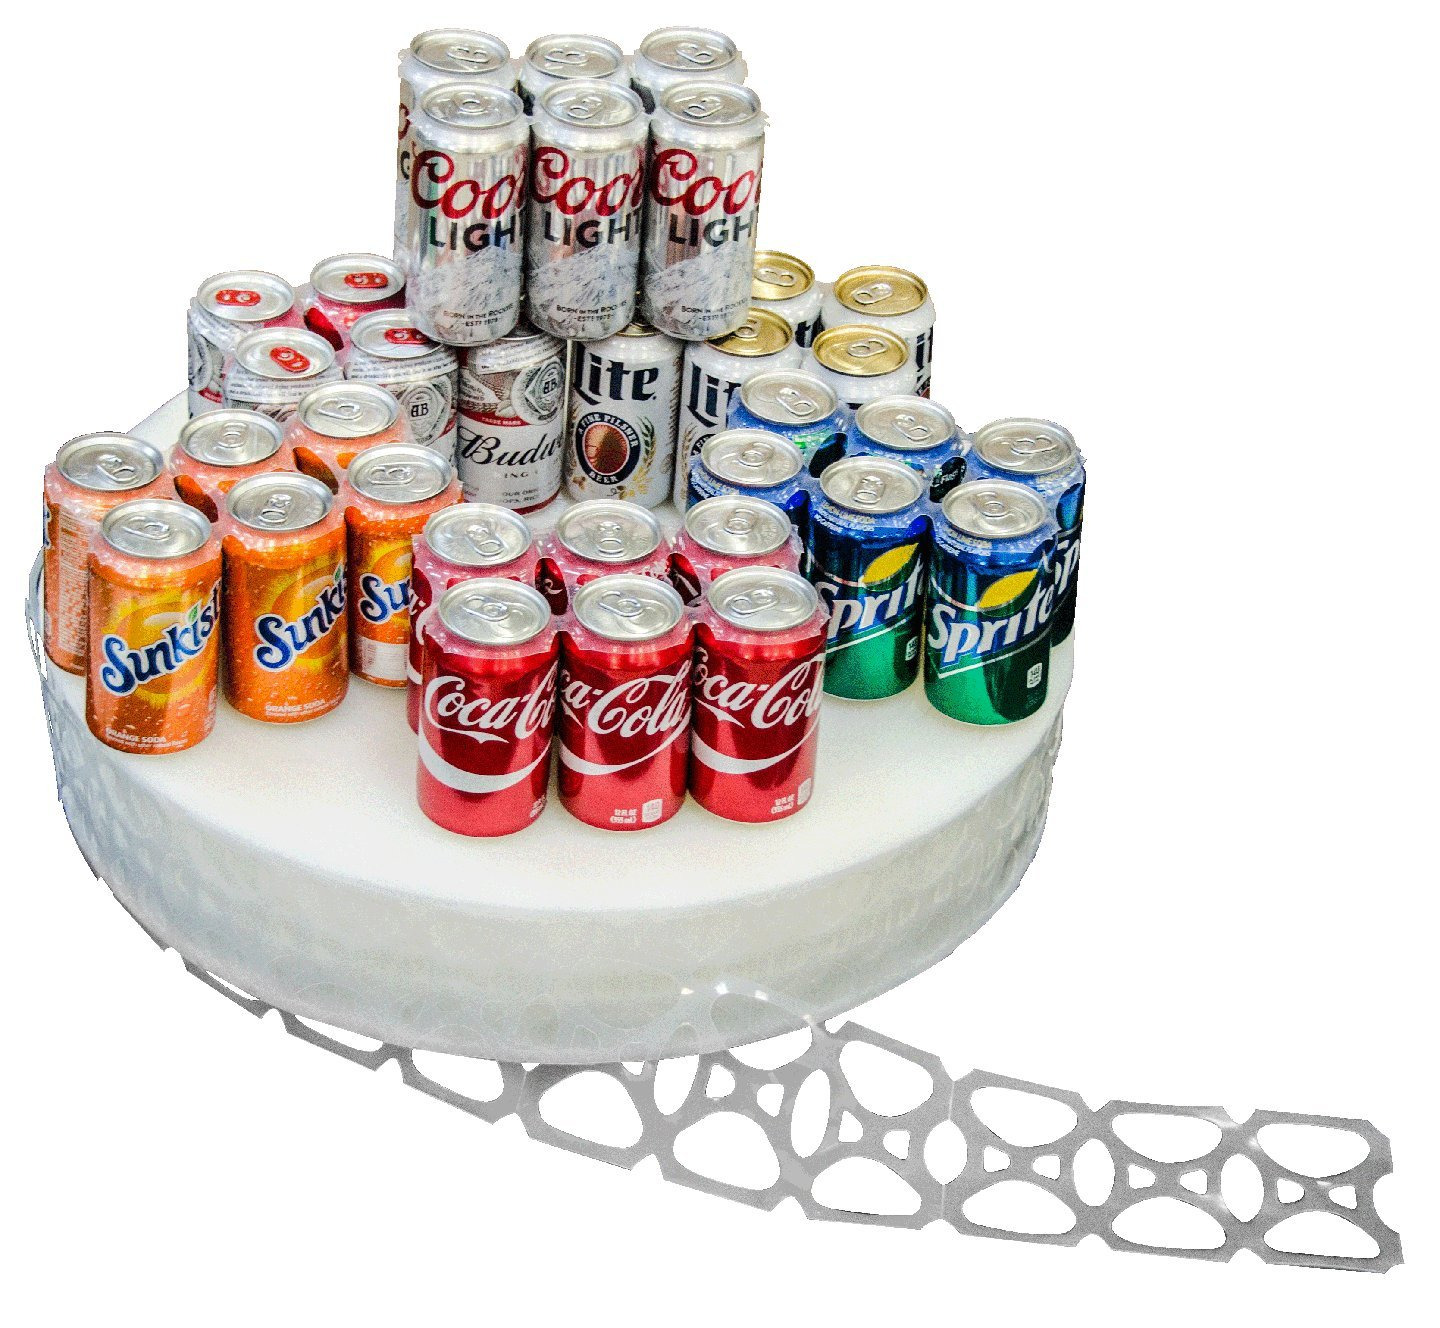 4300 Count Roll 6Pk Rings Universal Fit - Fits All 12Oz Beer Soda Cans - FAST SA